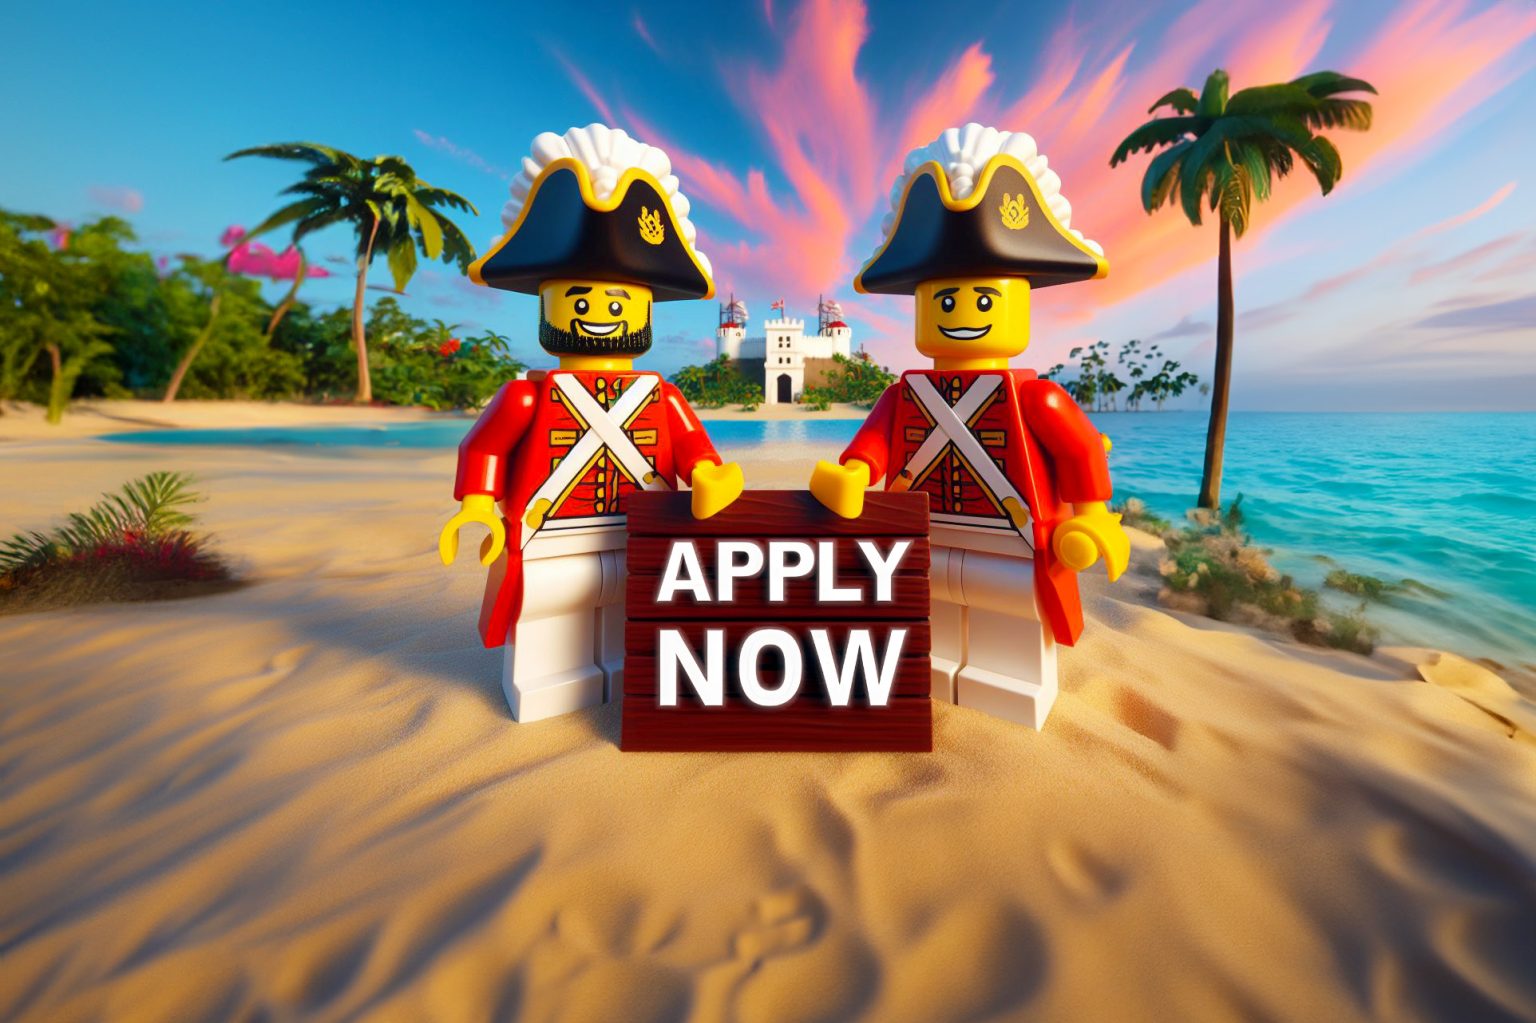 Two Imperial Guards Soldiers holding an Apply Now sign on a beach